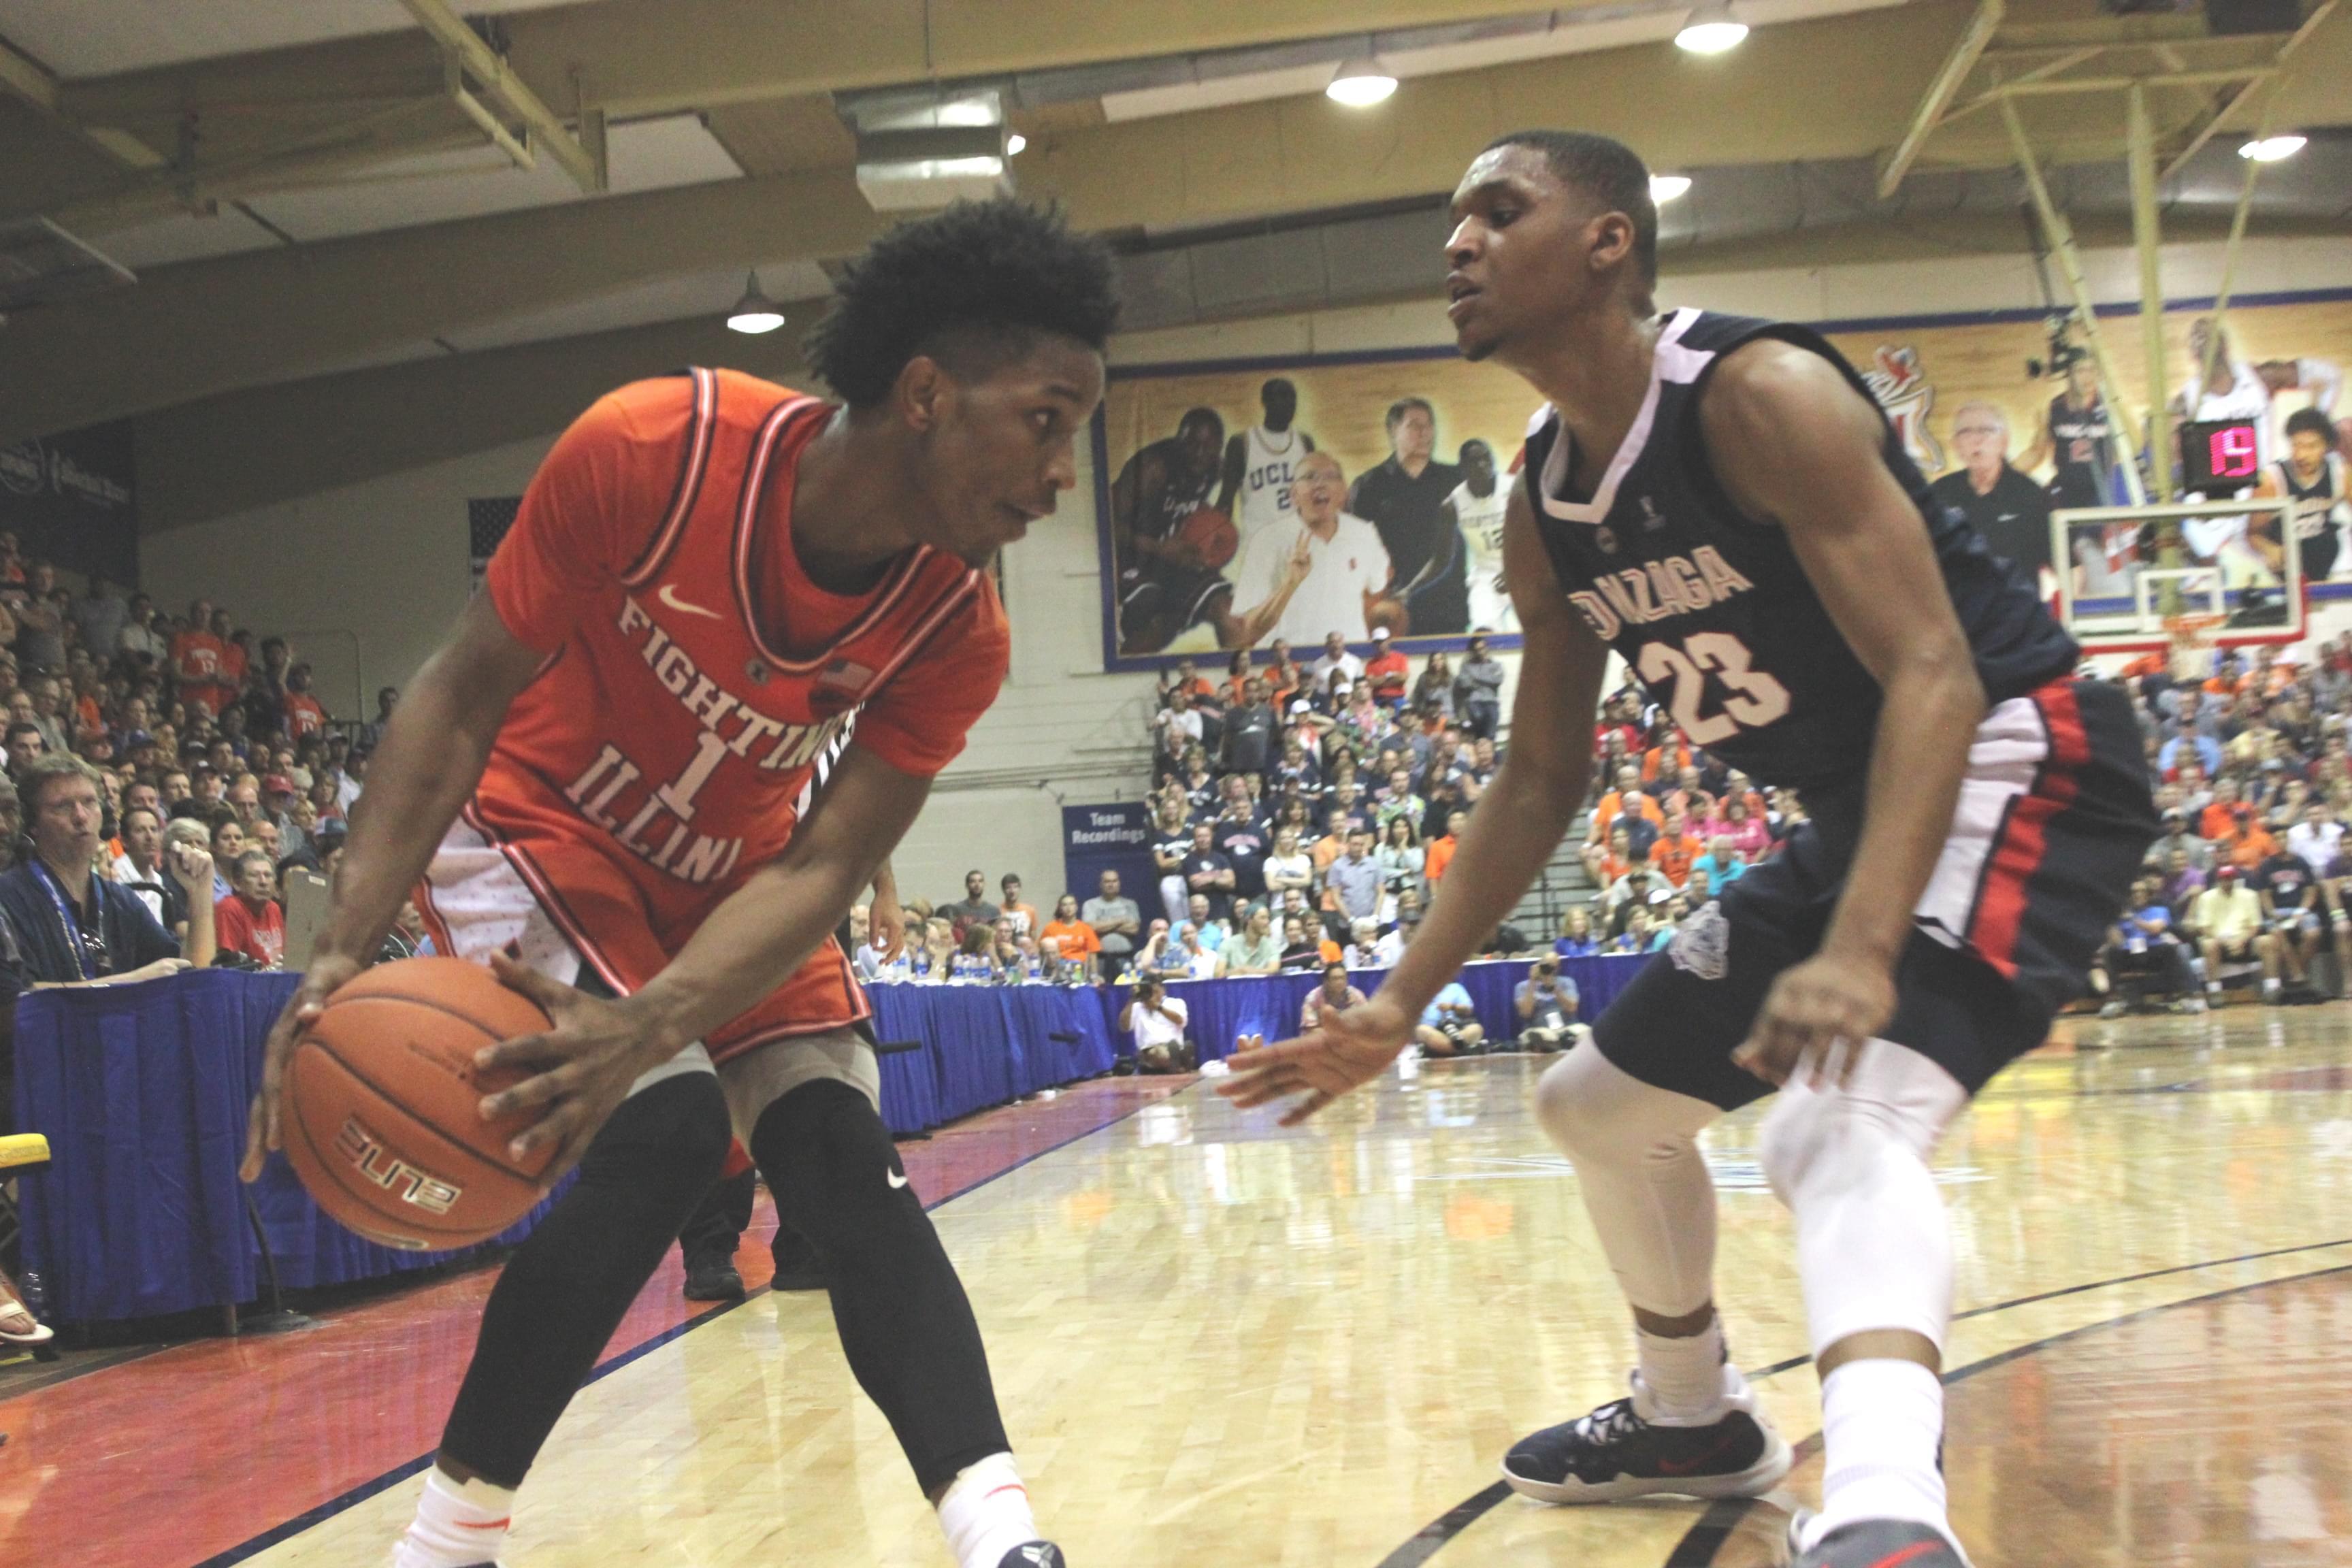 Trent Frazier looks for an opening as Gonzaga's Zach Norvell closes in, Monday night at the Maui Invitational in Lahaina, Hawaii